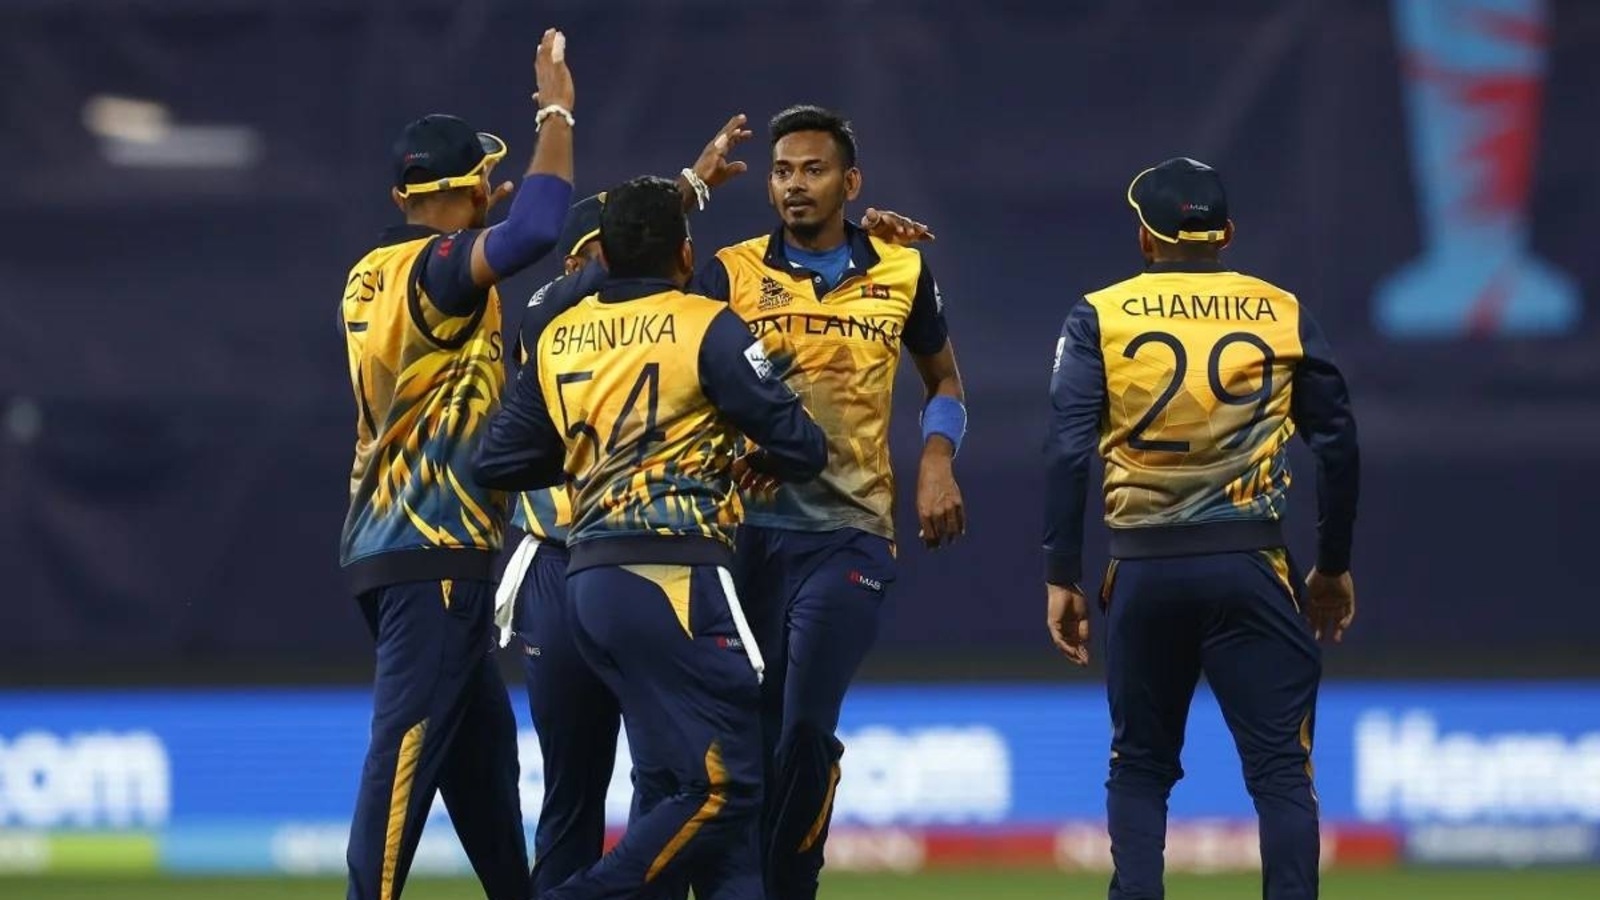 sri-lanka-s-injury-toll-ahead-of-t20-world-cup-rises-to-three-forced-to-dig-into-reserves